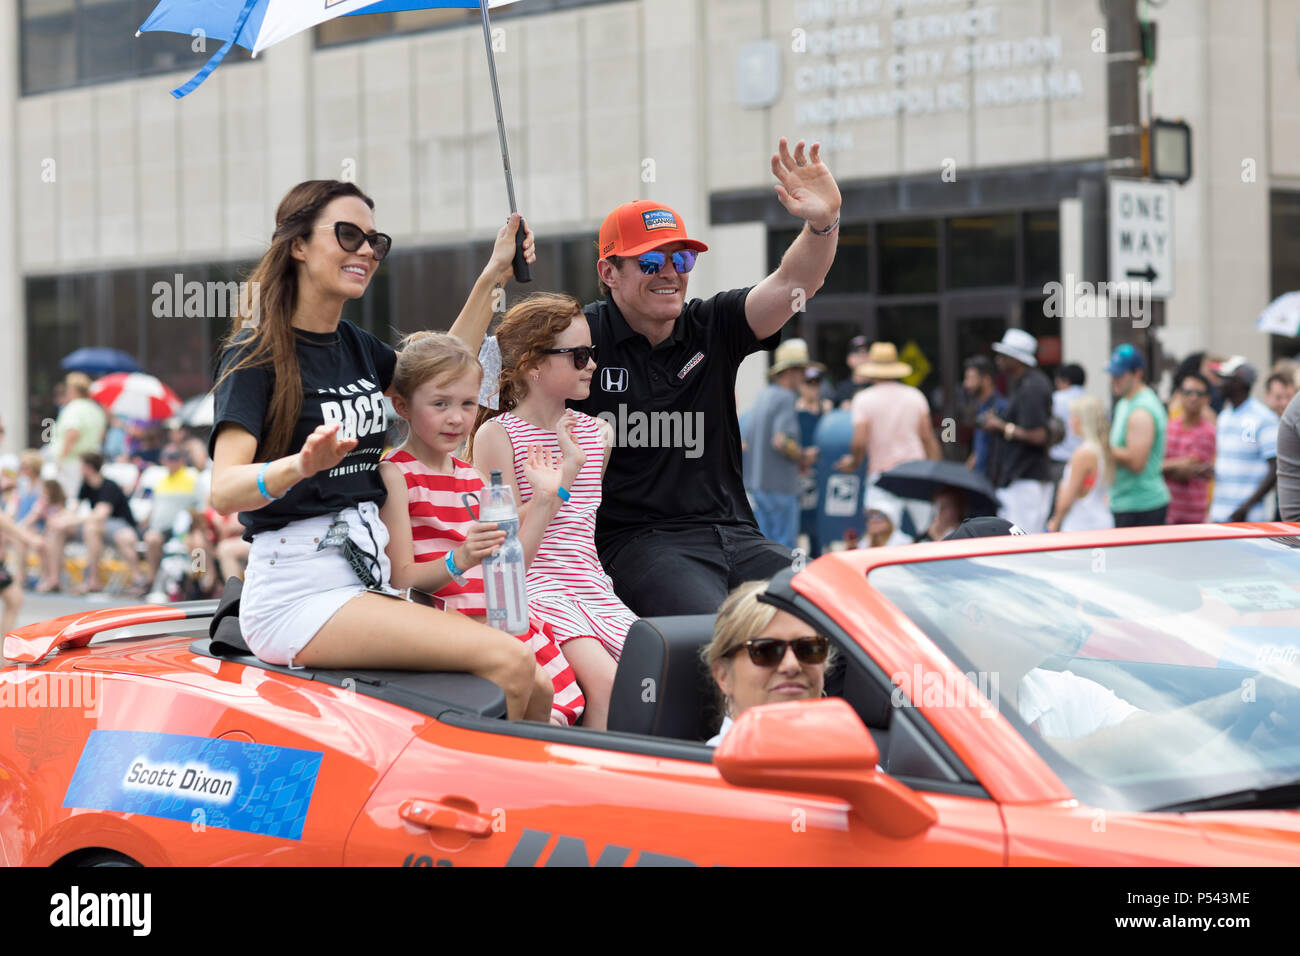 Indianapolis, Indiana, USA - May 26, 2018, Indycar driver Scott Dixon and his family on a car going down the road at the Indy 500 Parade Stock Photo